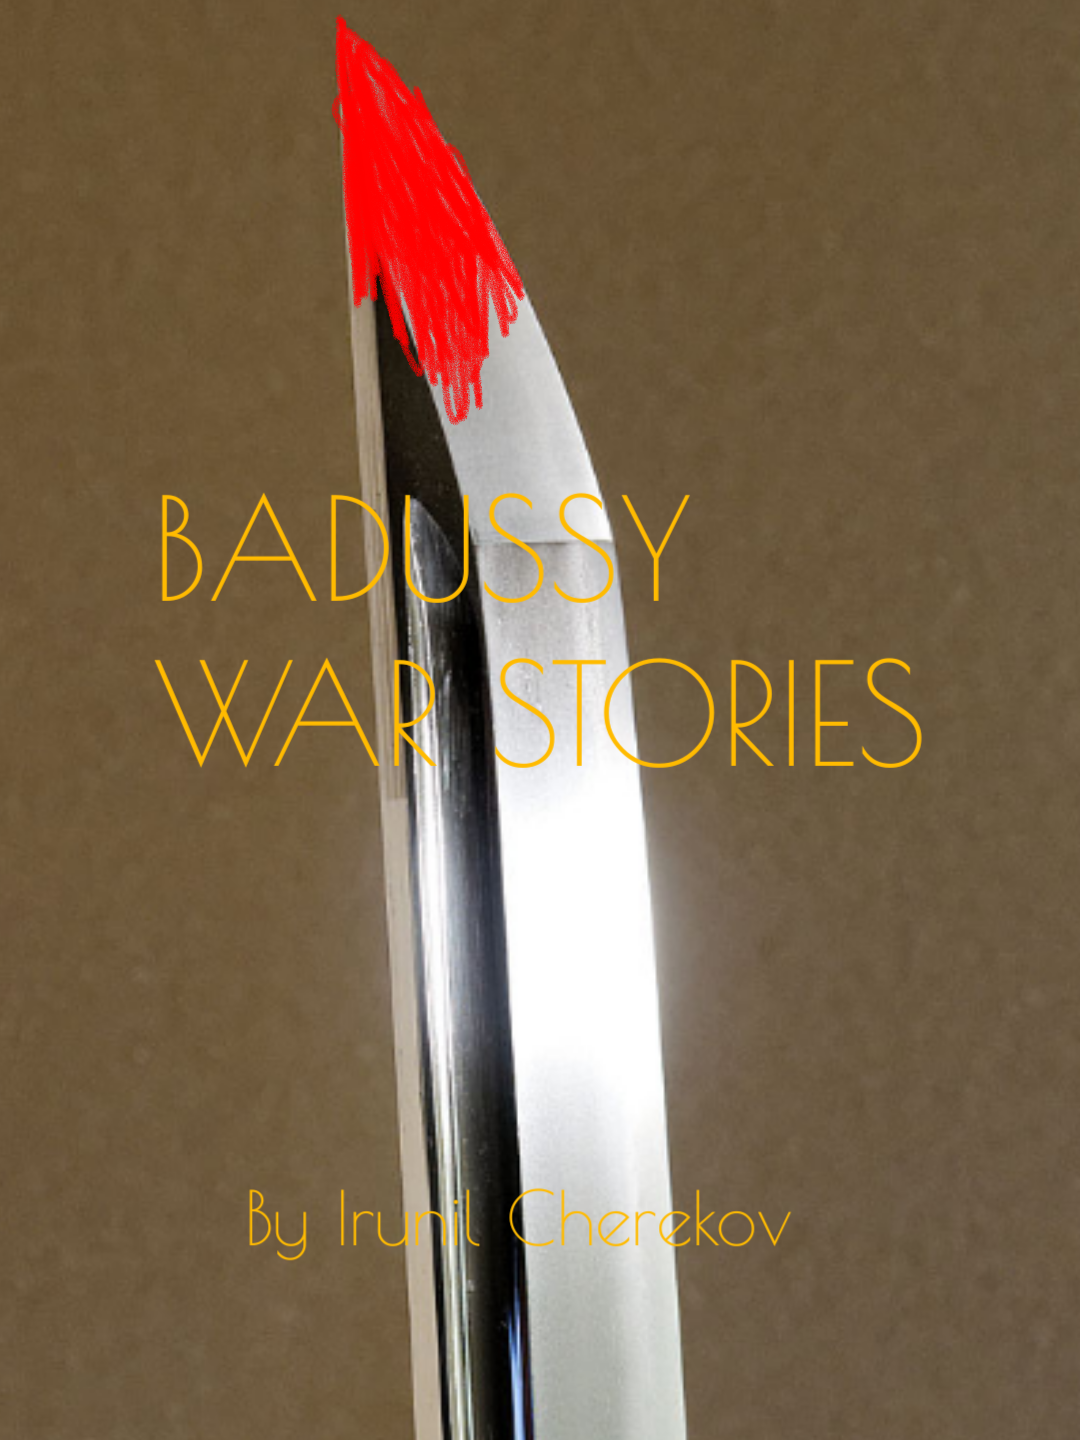 Jiafei Bedtime Storys, Badussy Books And more Wiki